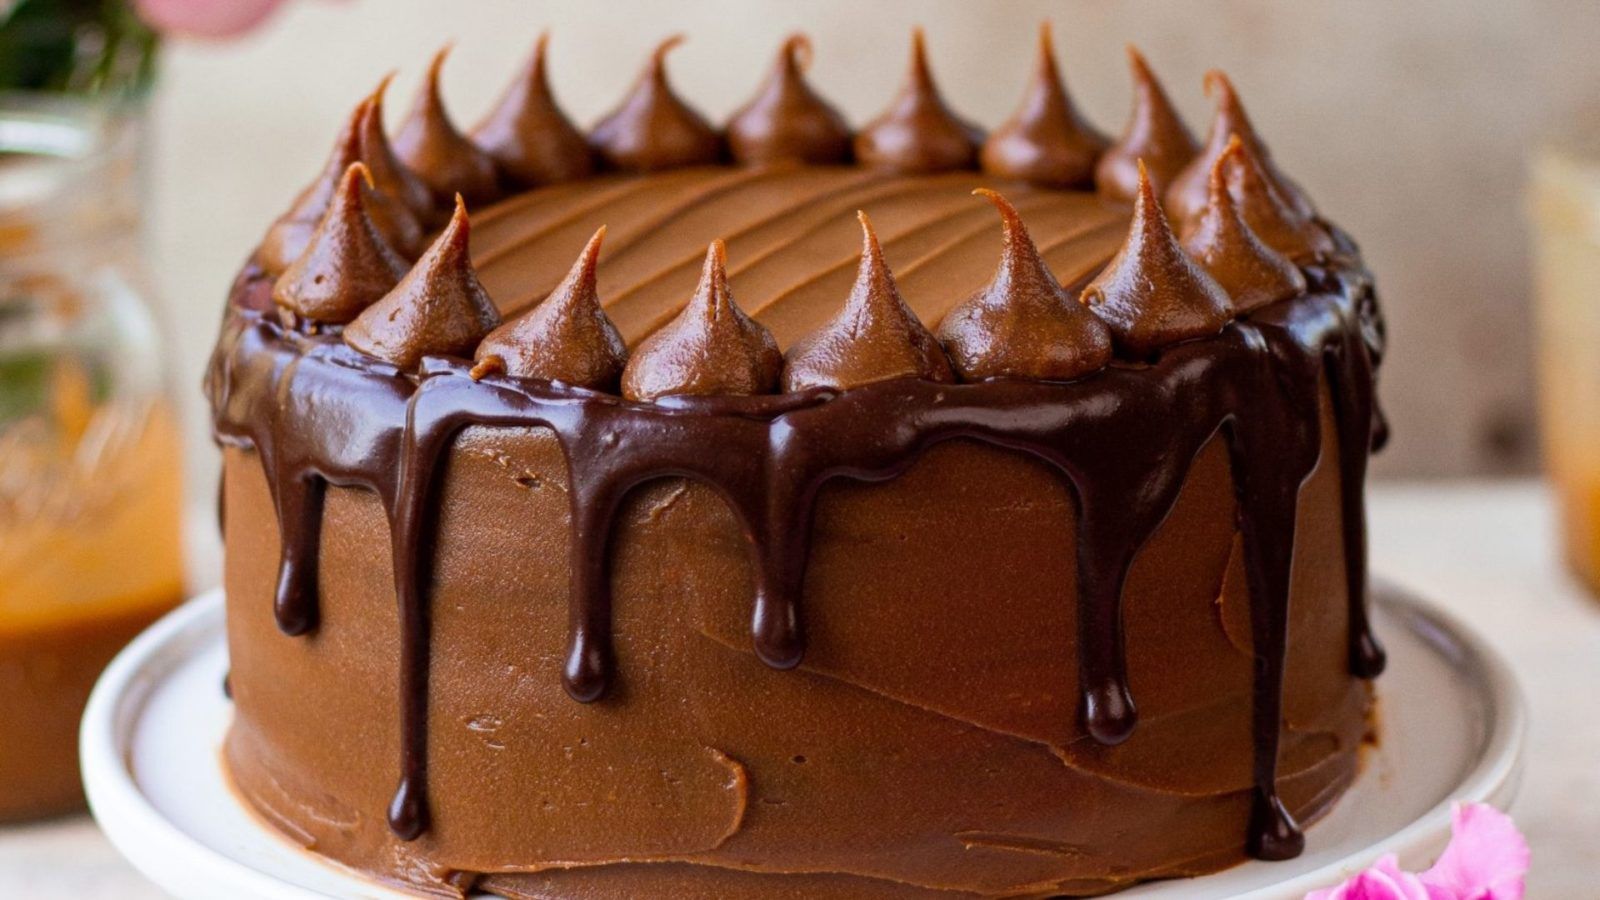 This is the most decadent chocolate cake you’ll make in your life